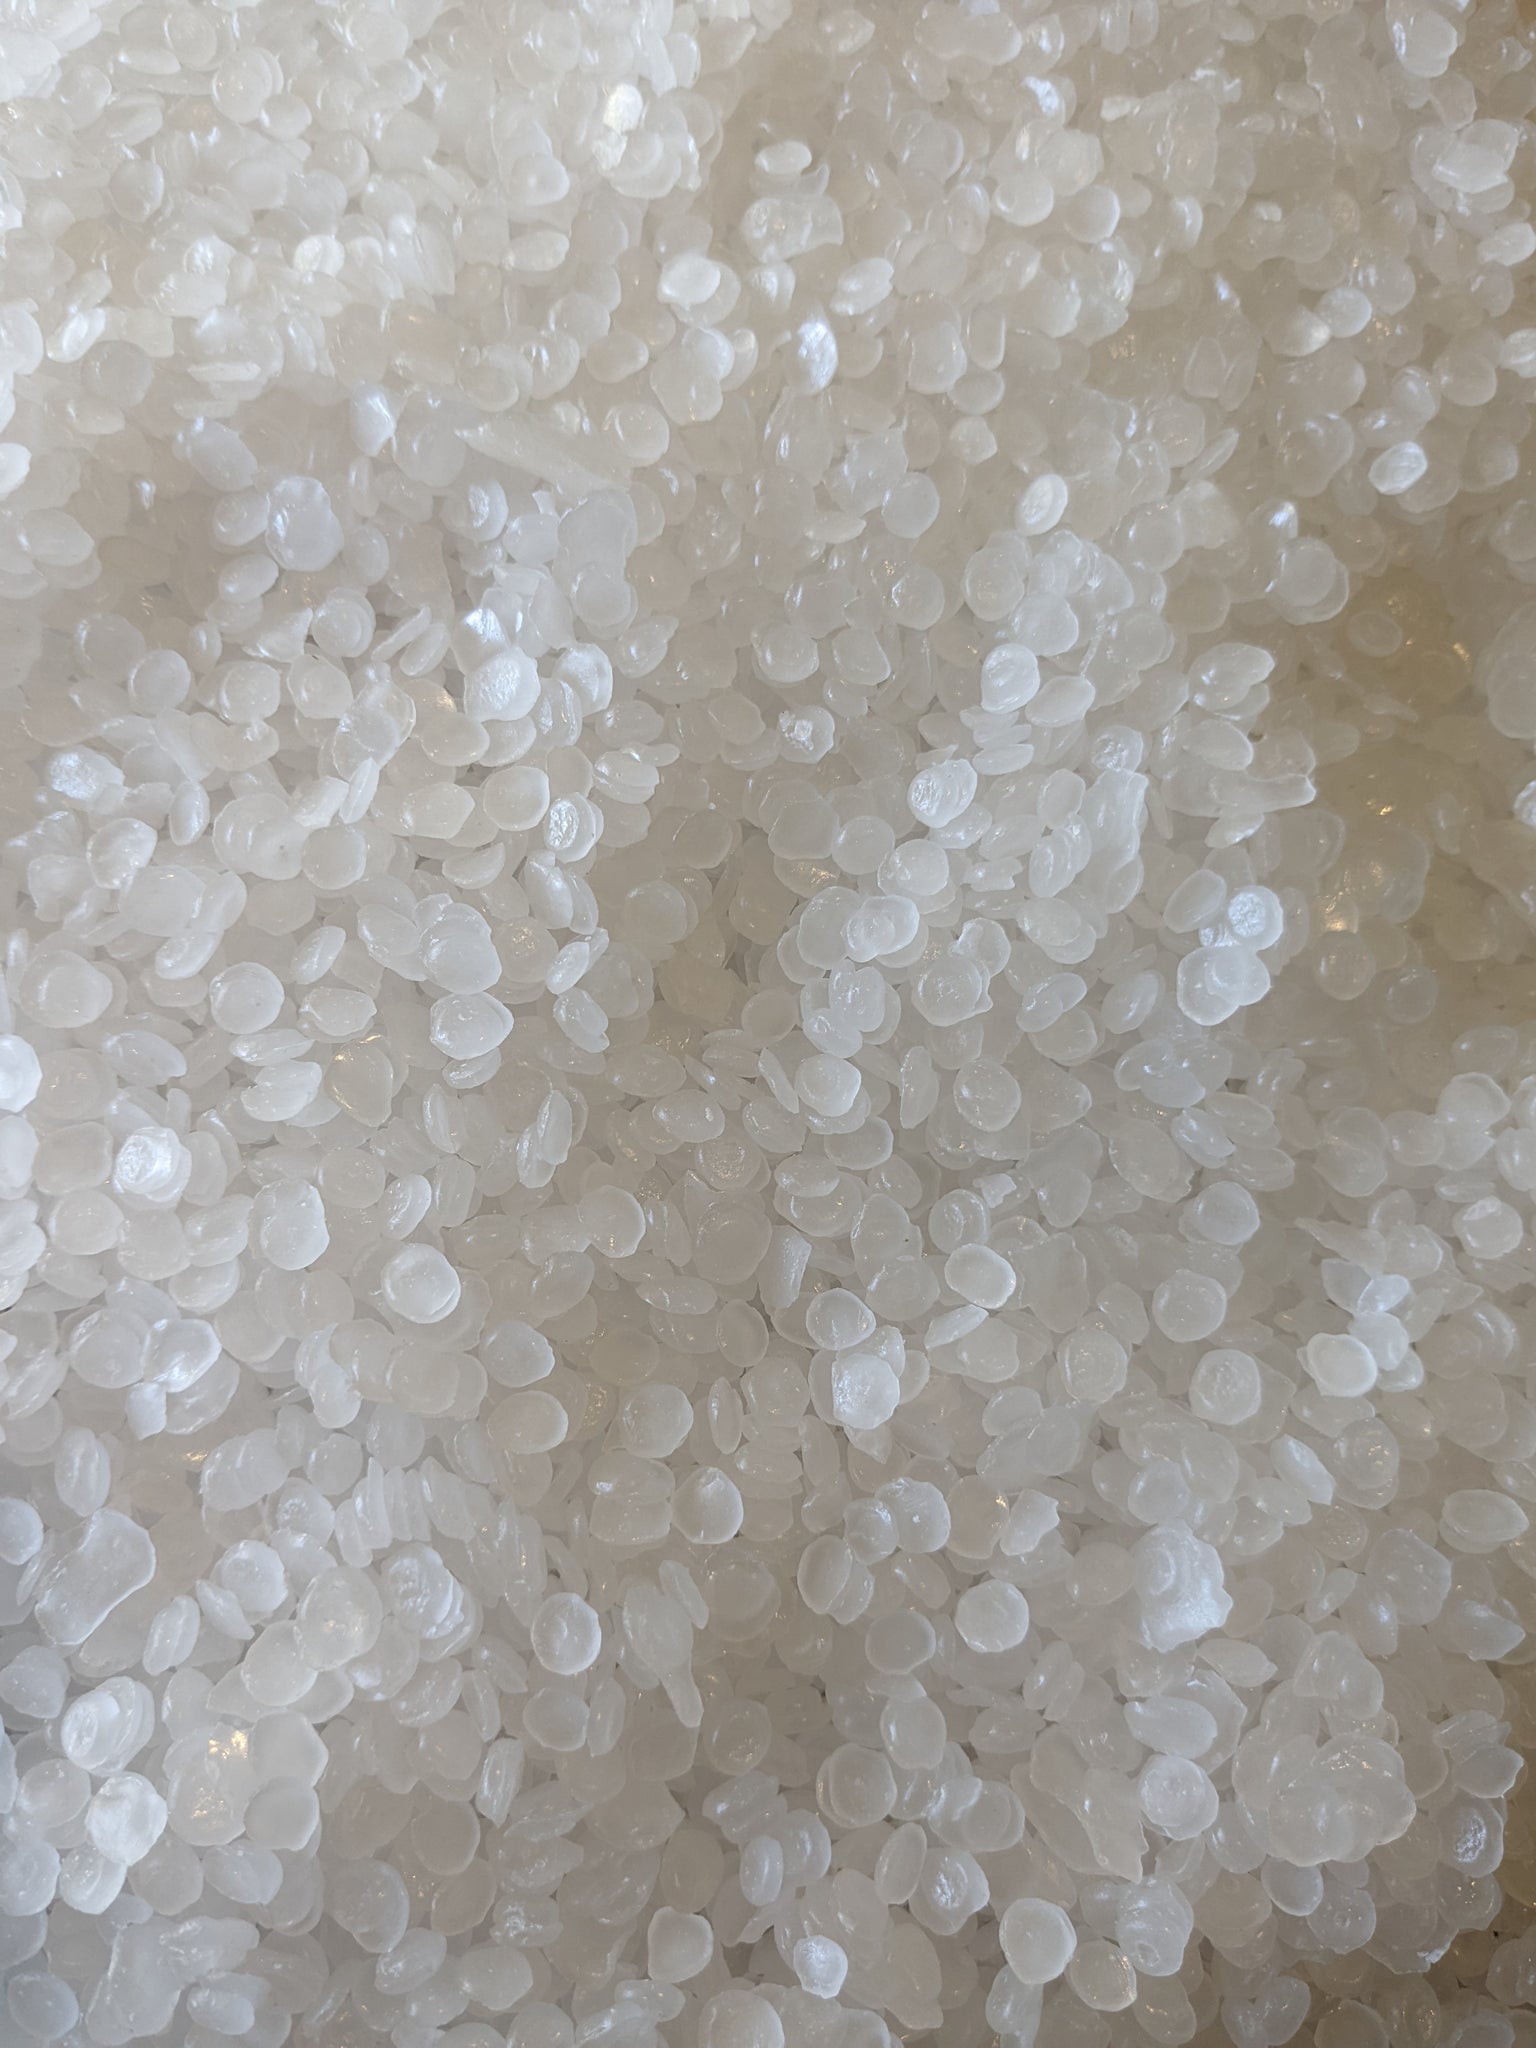 Paraffin Wax 100% Pure Natural White Pellets Beads Pastilles for